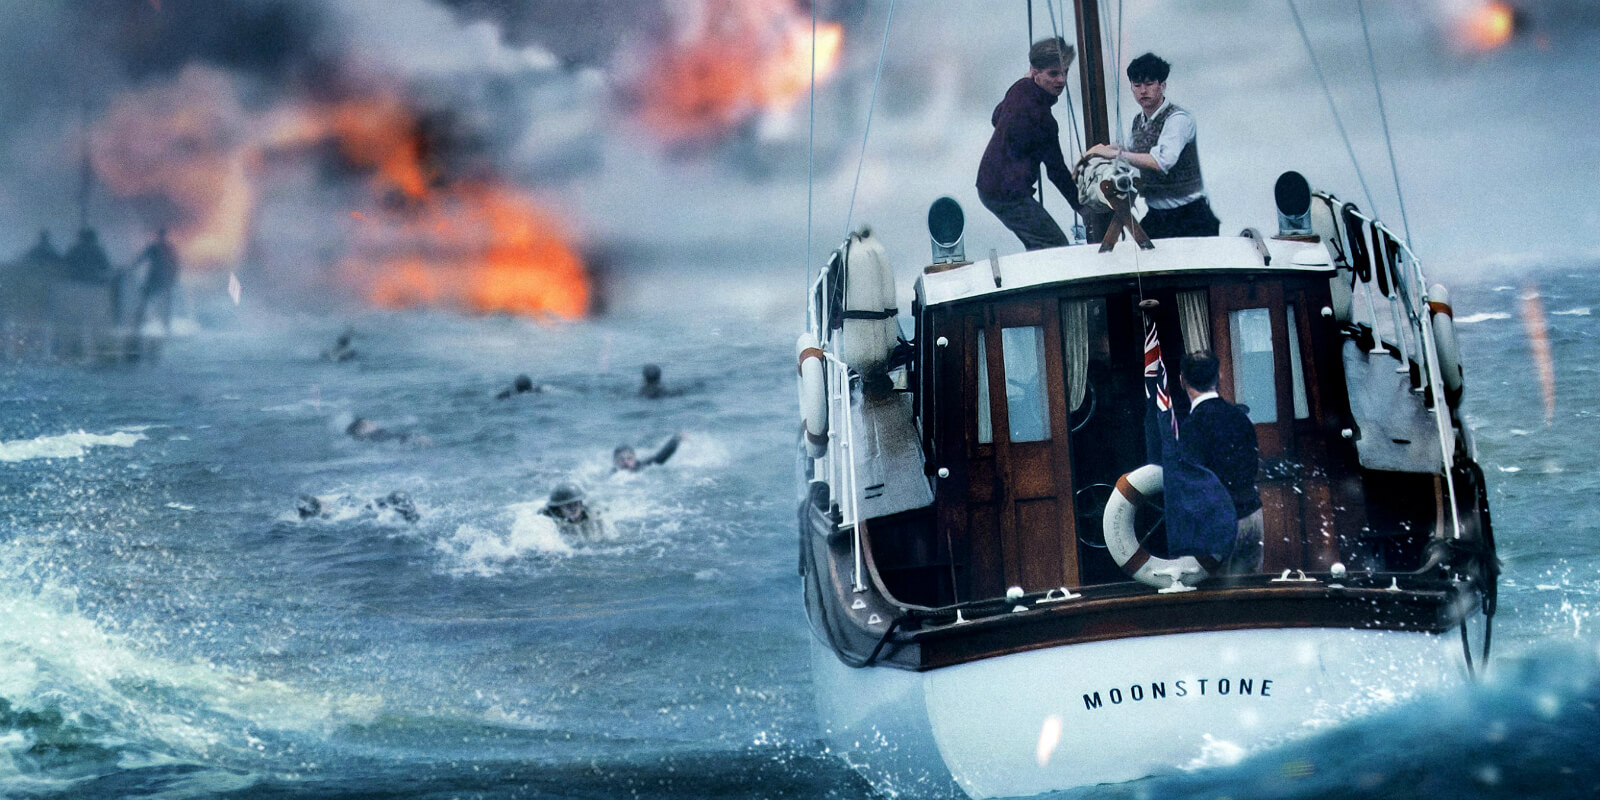 Christopher nolans dunkirk imax poster cropped  1 